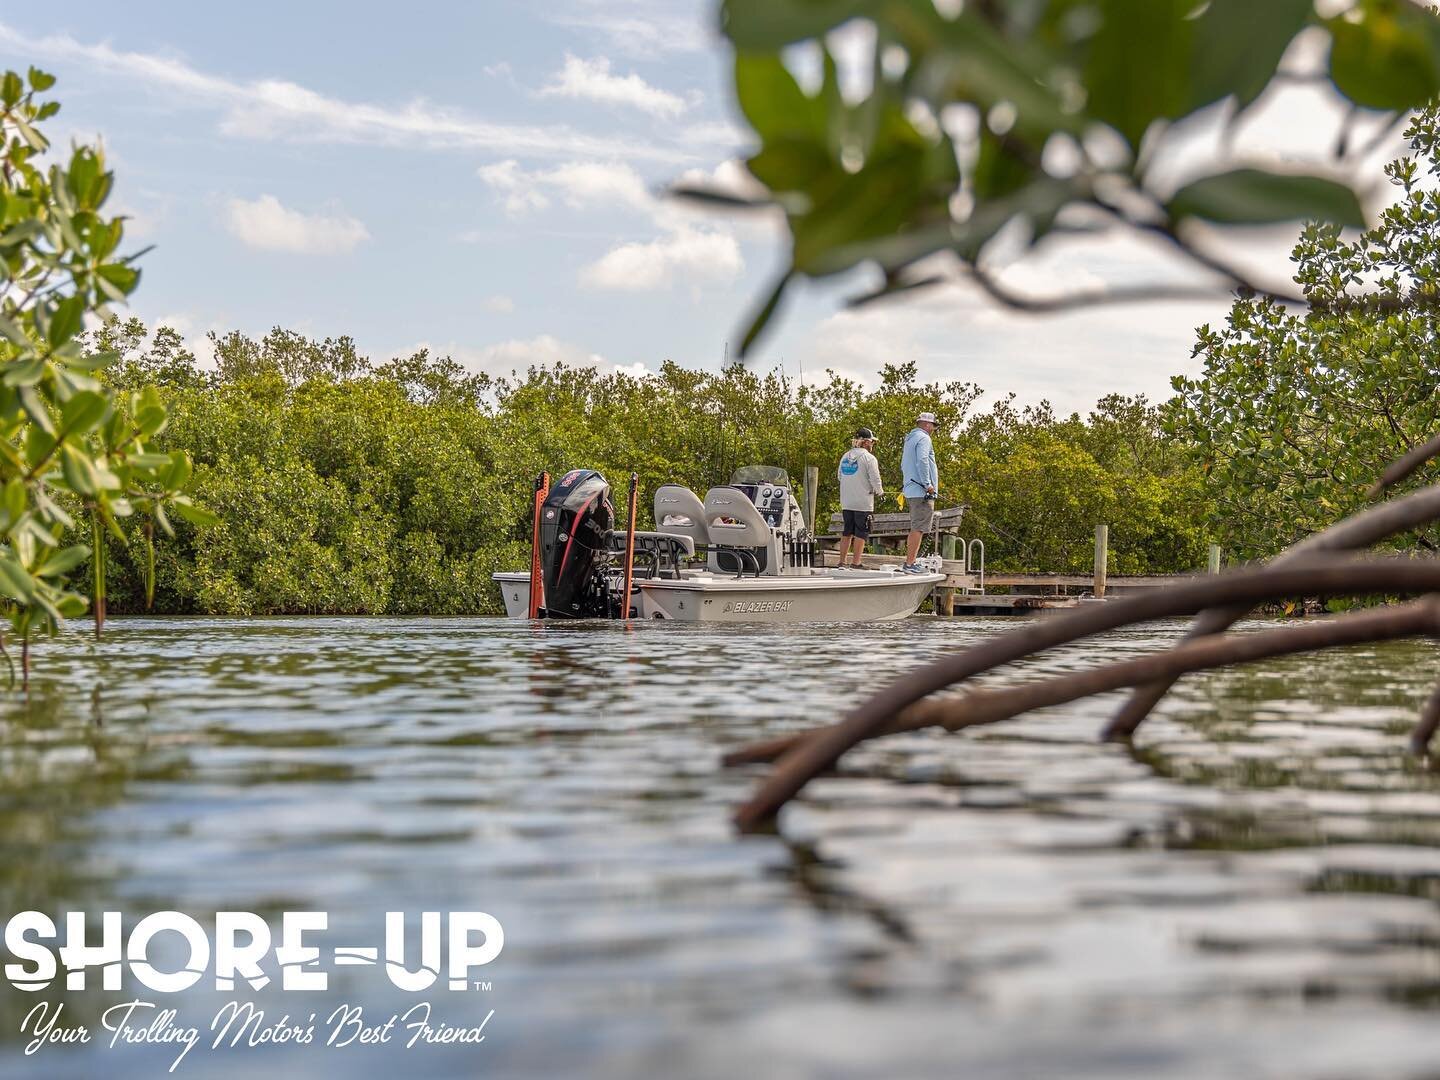 One of the absolute best parts about the Shore-Up system is the ease of use and installation. Once you purchase this product you&rsquo;ll have the ability to install it before your next fishing trip. This product is built by fisherman for fisherman. 